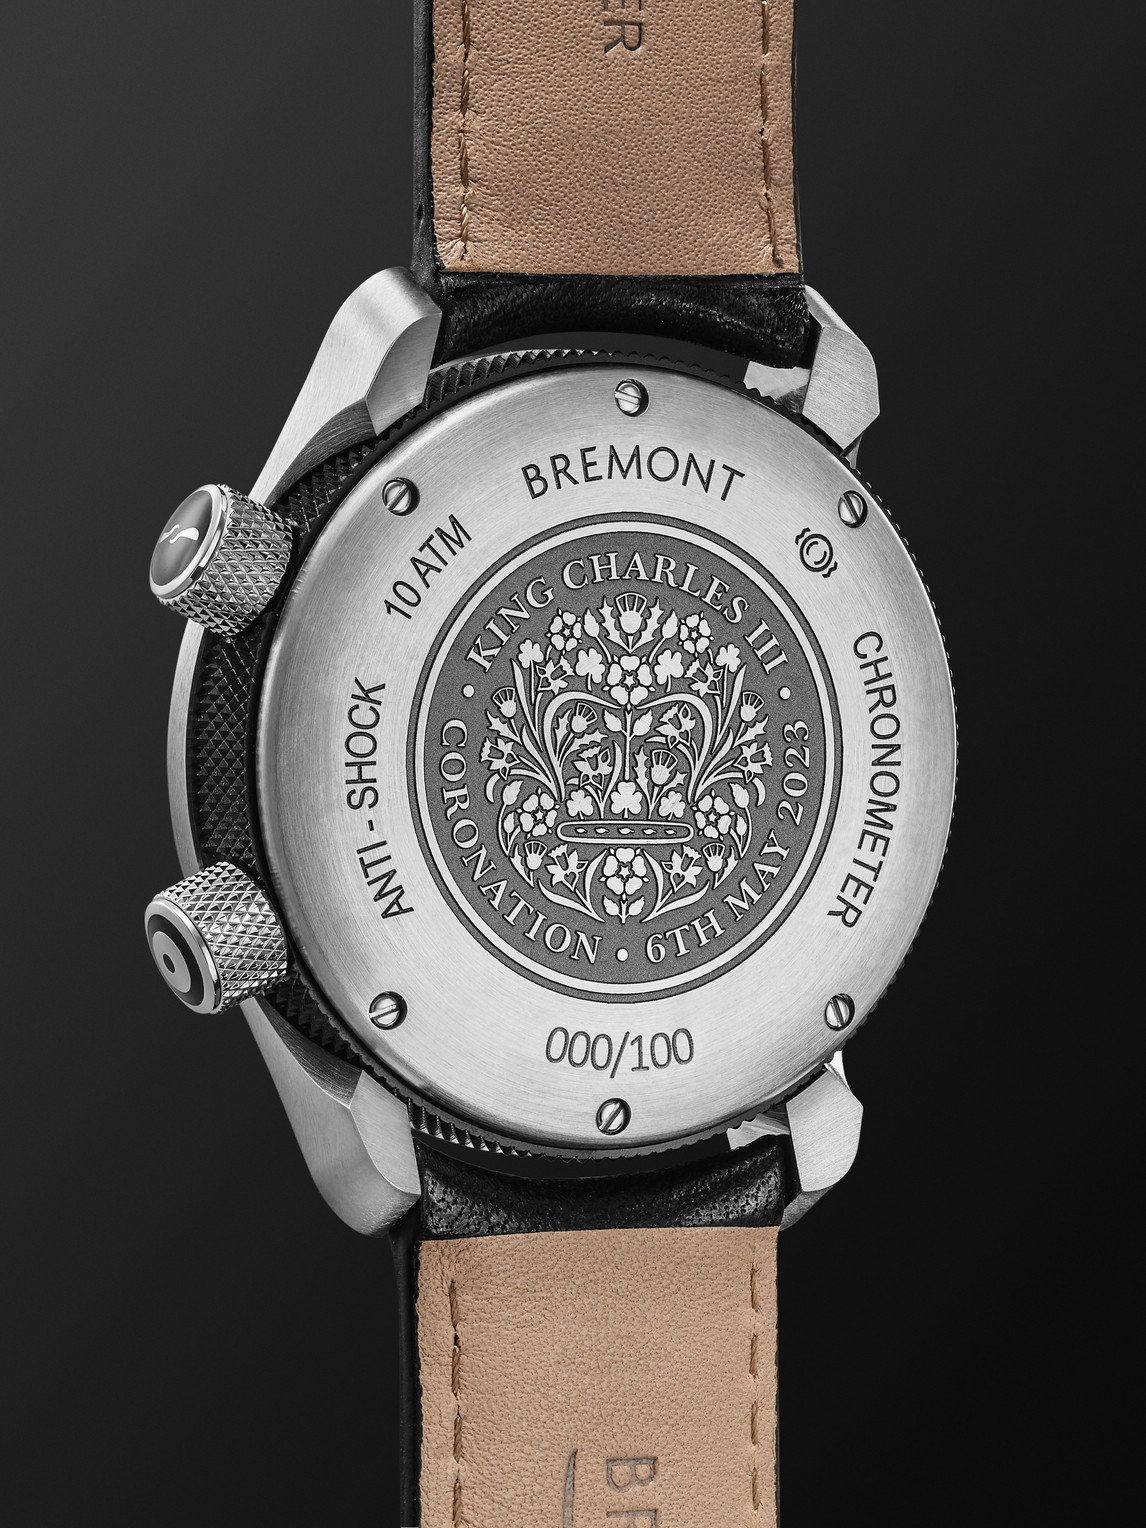 Shop Bremont Mbii King Charles Iii Limited Edition Automatic 43mm Stainless Steel And Leather Watch, Ref. No. Mbi In Black